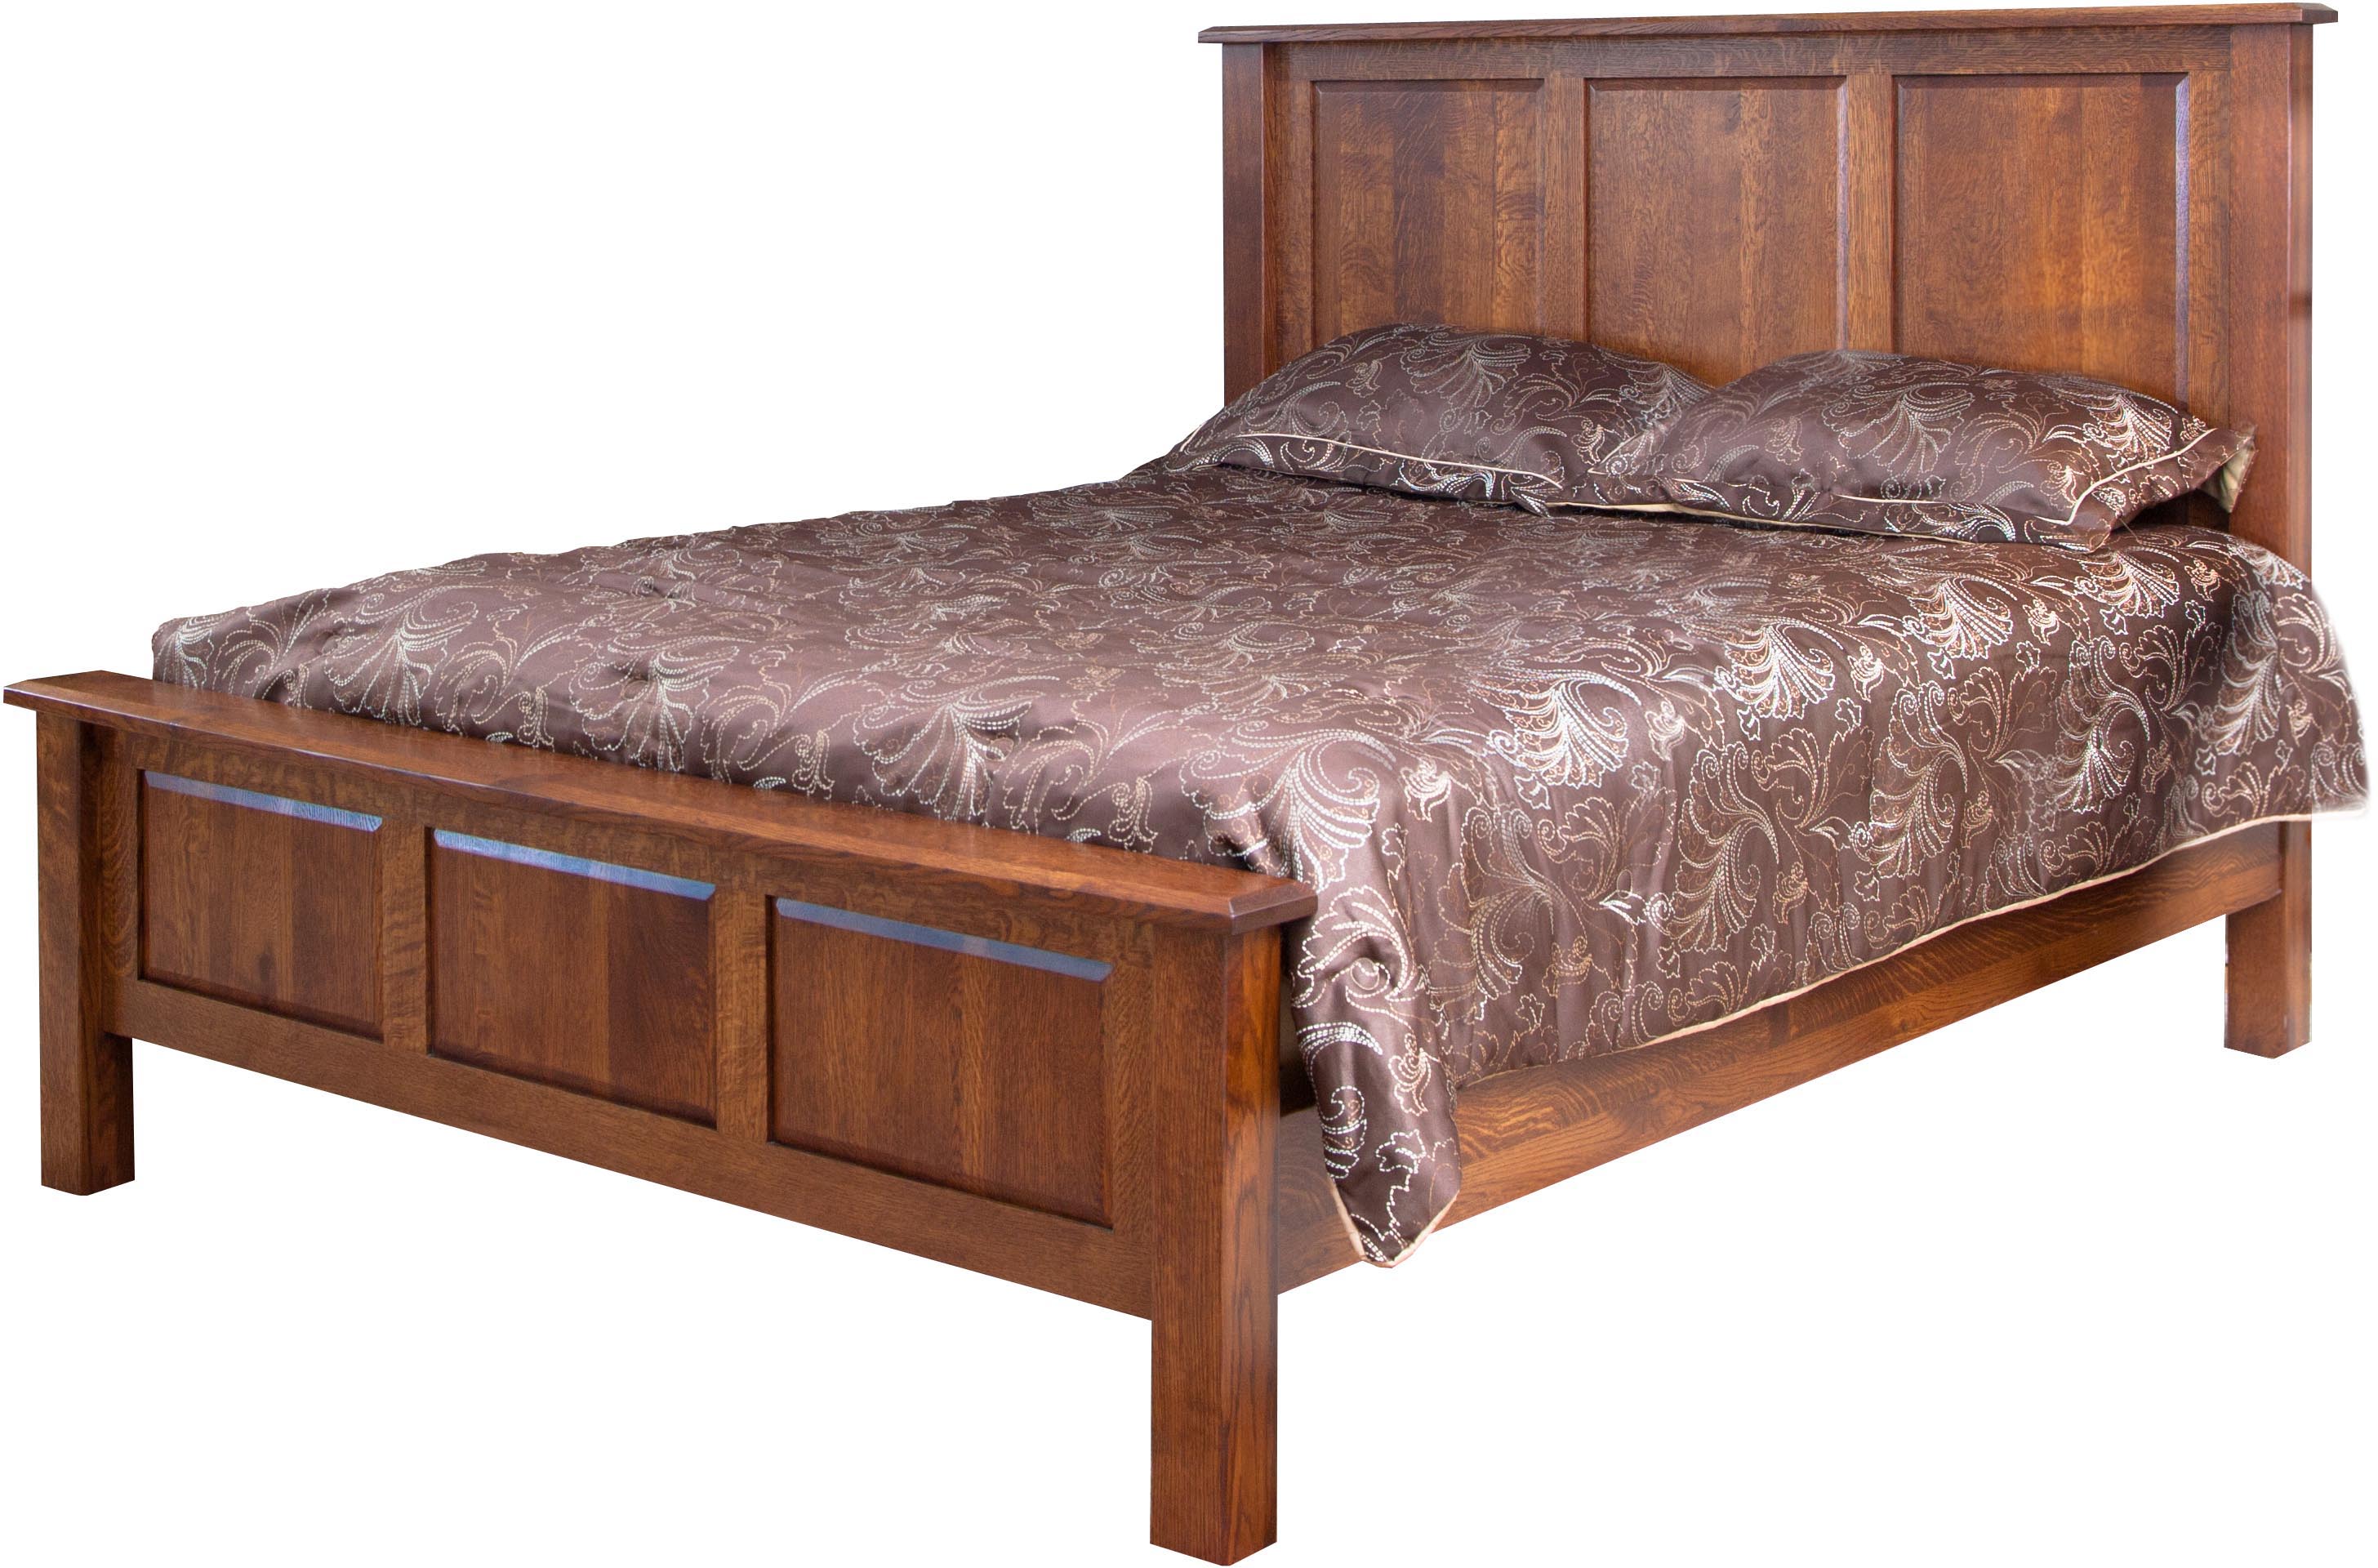 Old Bed PNG - 161260